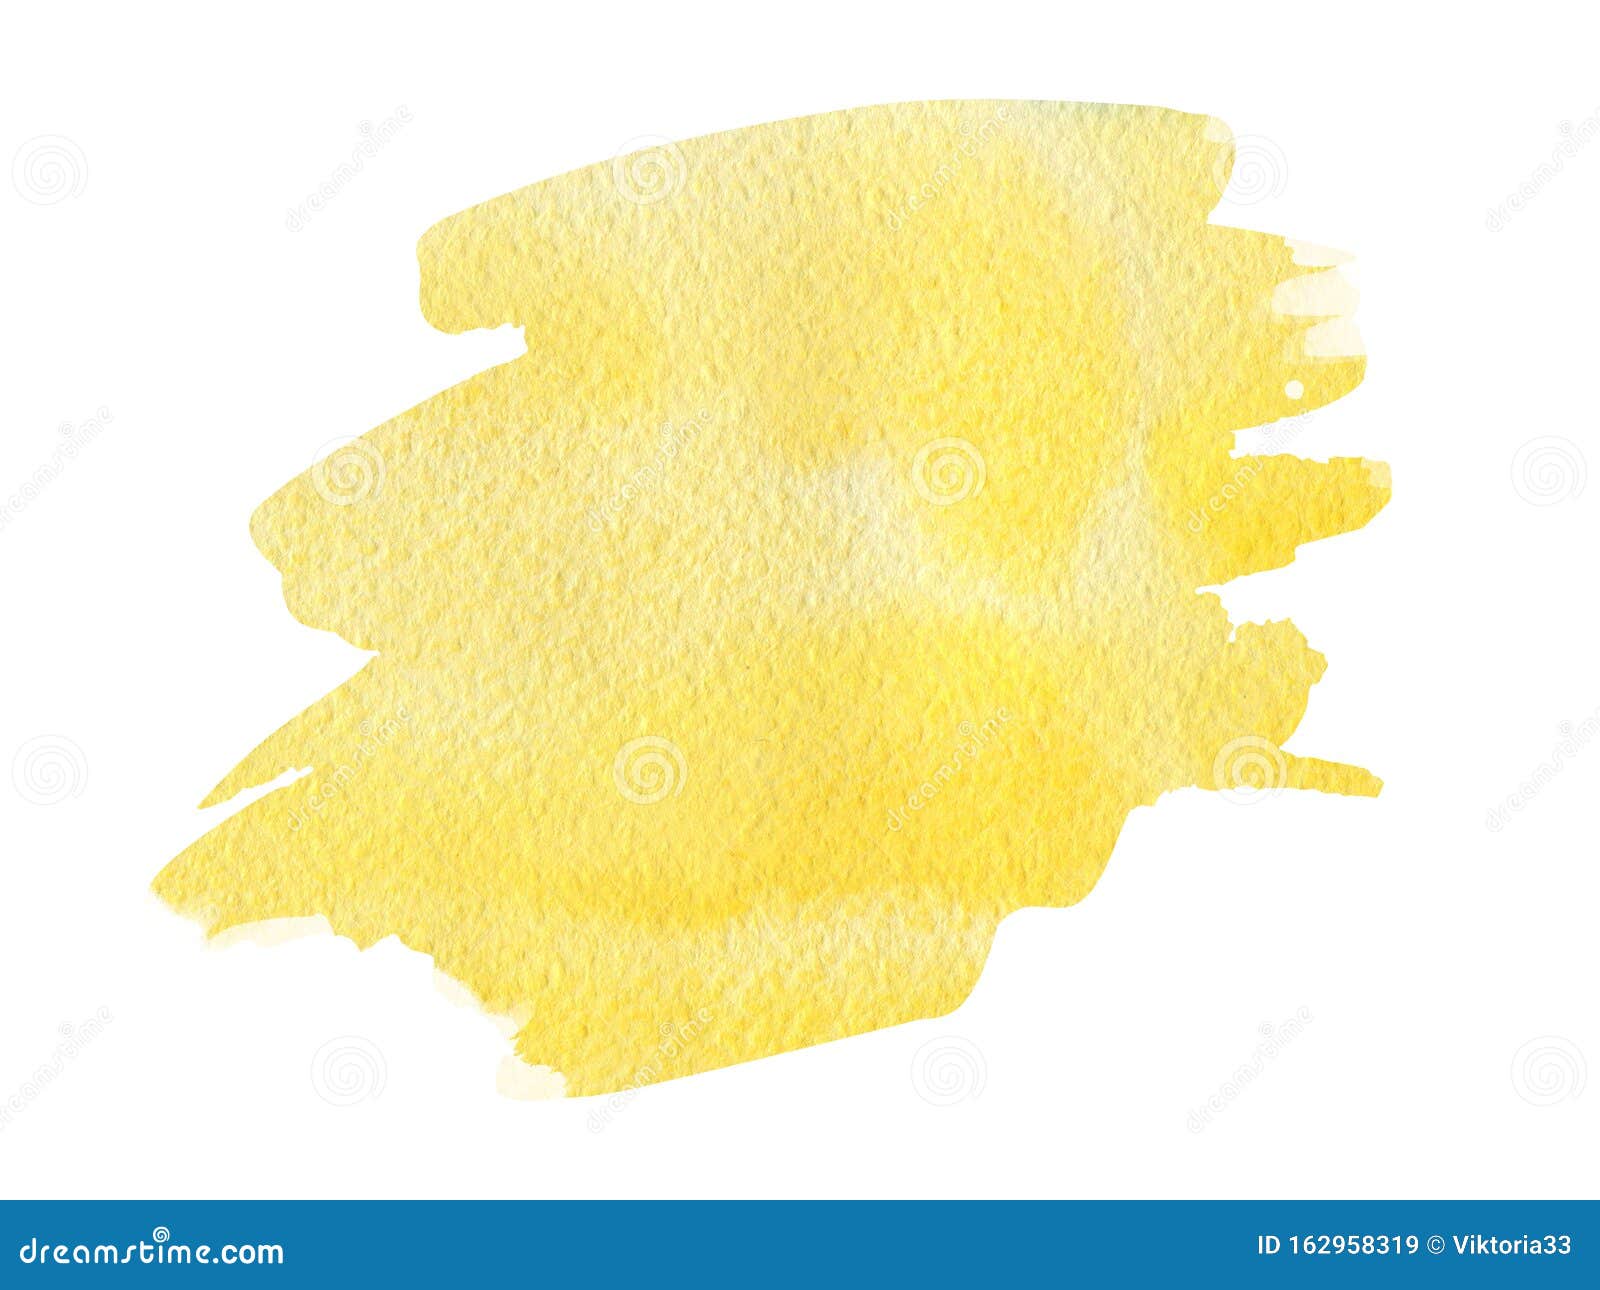 Abstract Yellow Watercolor Textured Background on a White Isolated ...